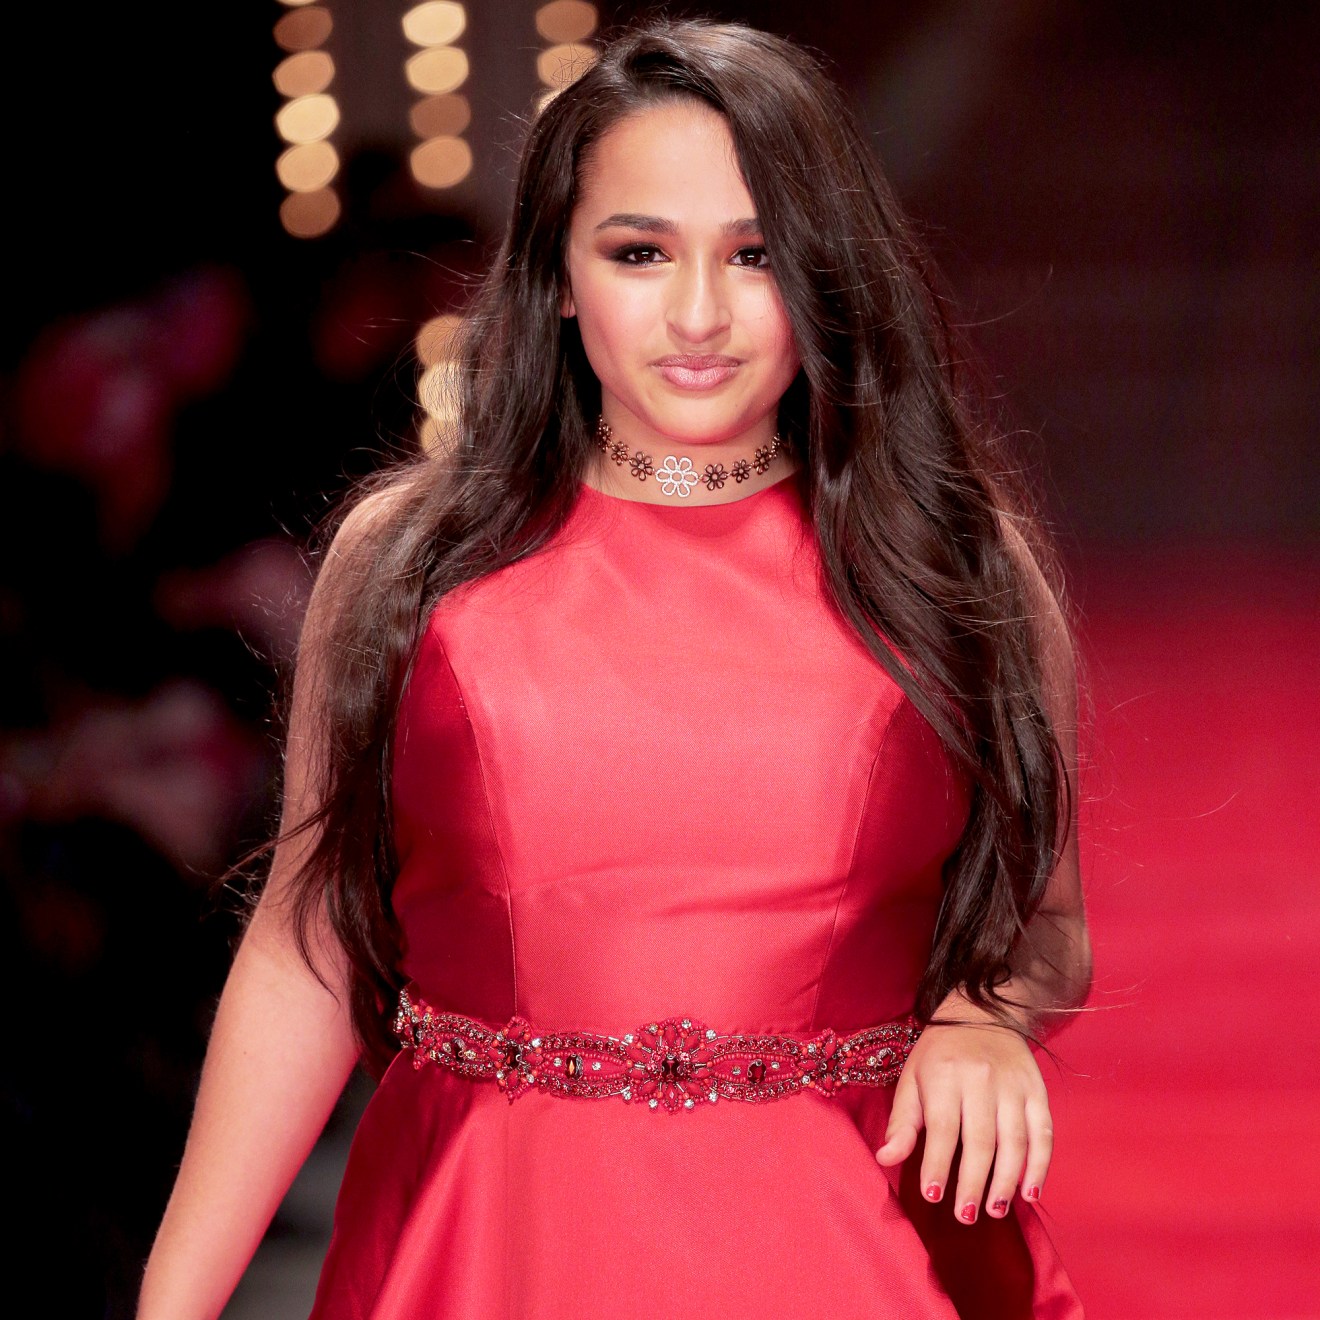 TLC's Jazz Jennings Reveals Date of Her Gender Confirmation Surgery